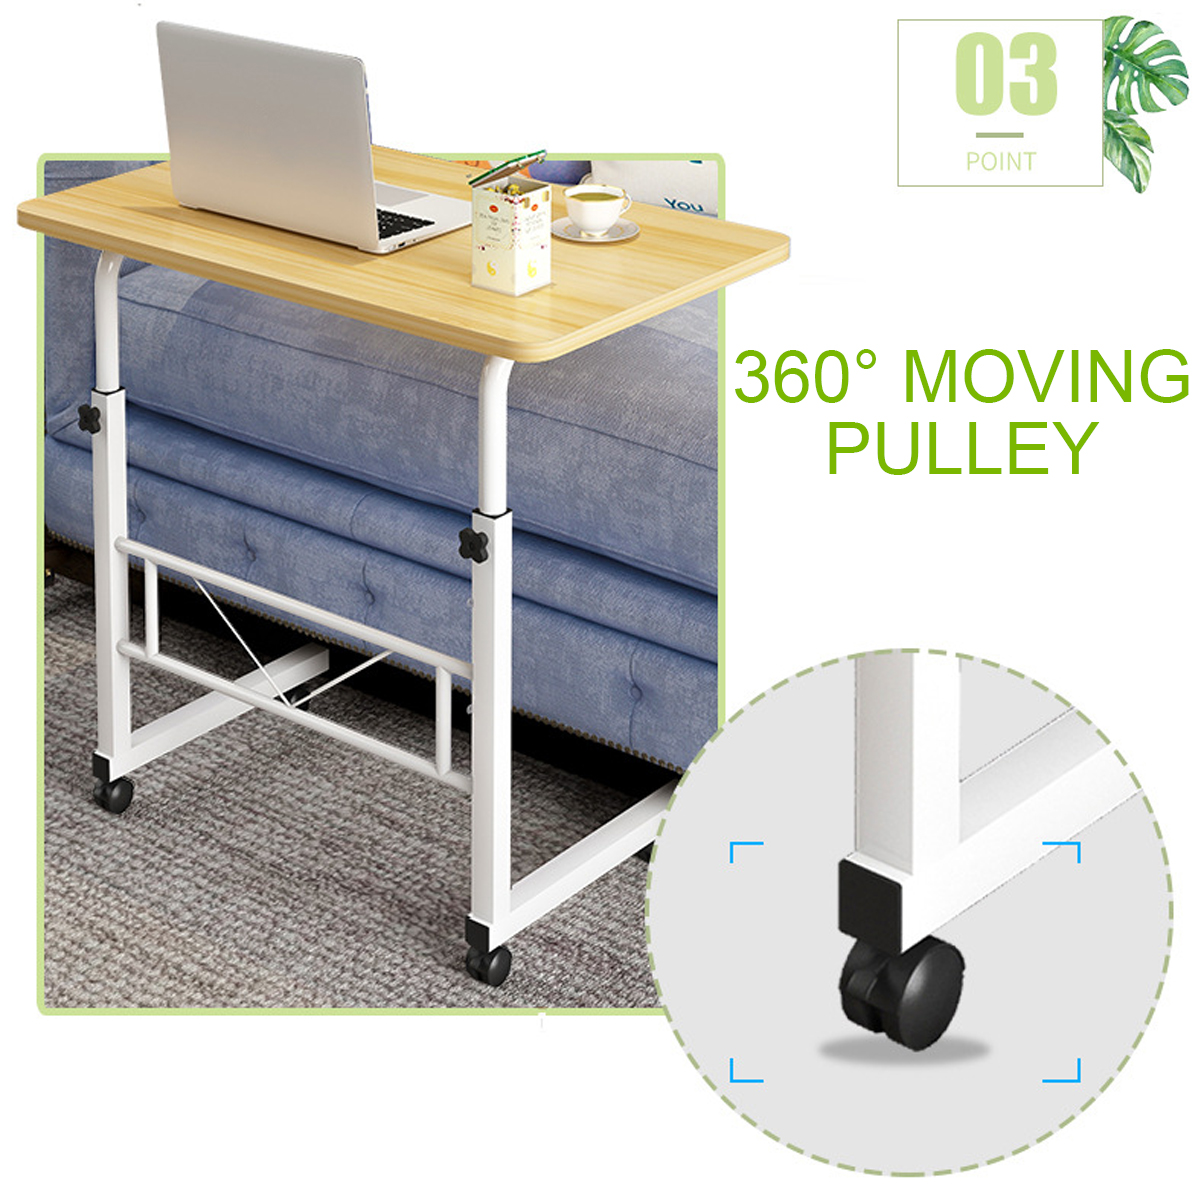 Removable-Laptop-Table-Lifting-Desk-Tabletop-Food-Tray-Bedside-Table-Bed-Sofa-Stand-with-Wheel-1754628-4